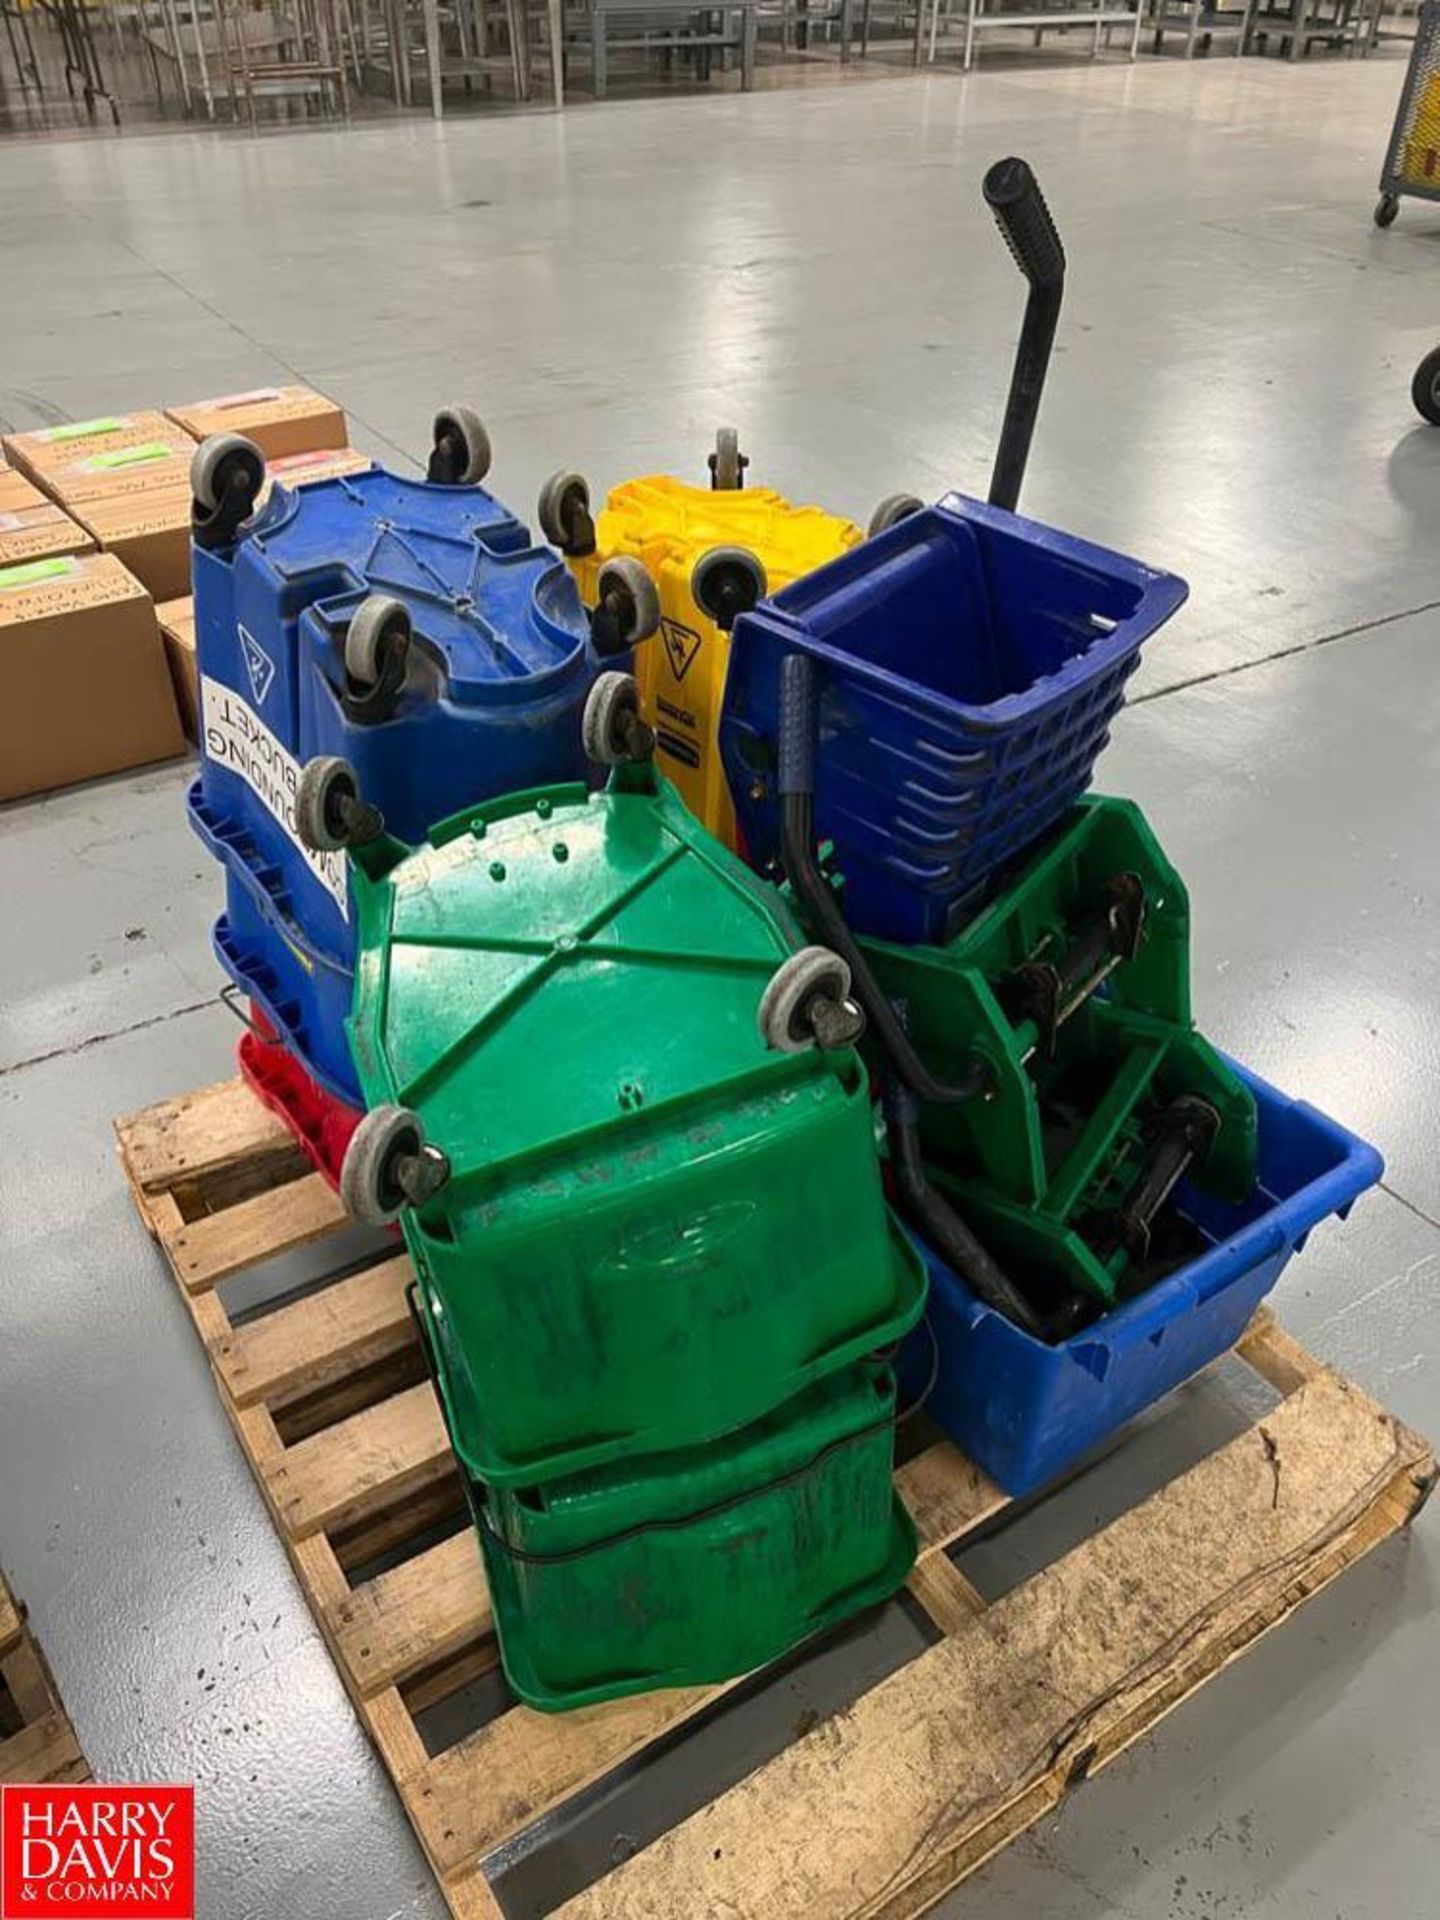 Assorted Trash Cans, Mops and Buckets, Brooms, Dust Pans, 5 Gallon Buckets, Recycling and Storage Bi